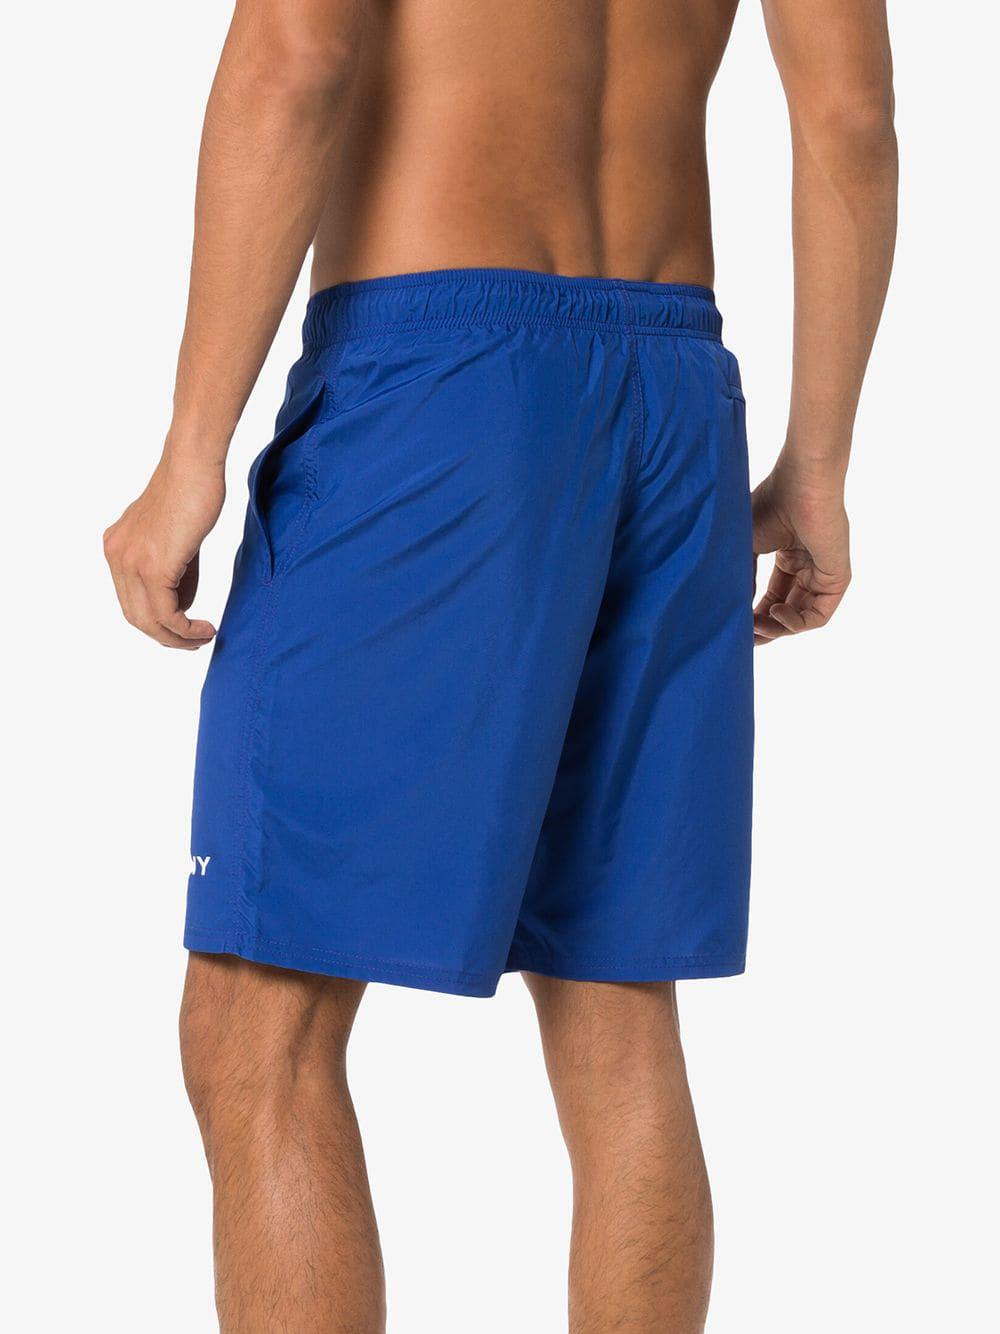 Givenchy Logo Printed Swim Shorts in Blue for Men - Lyst